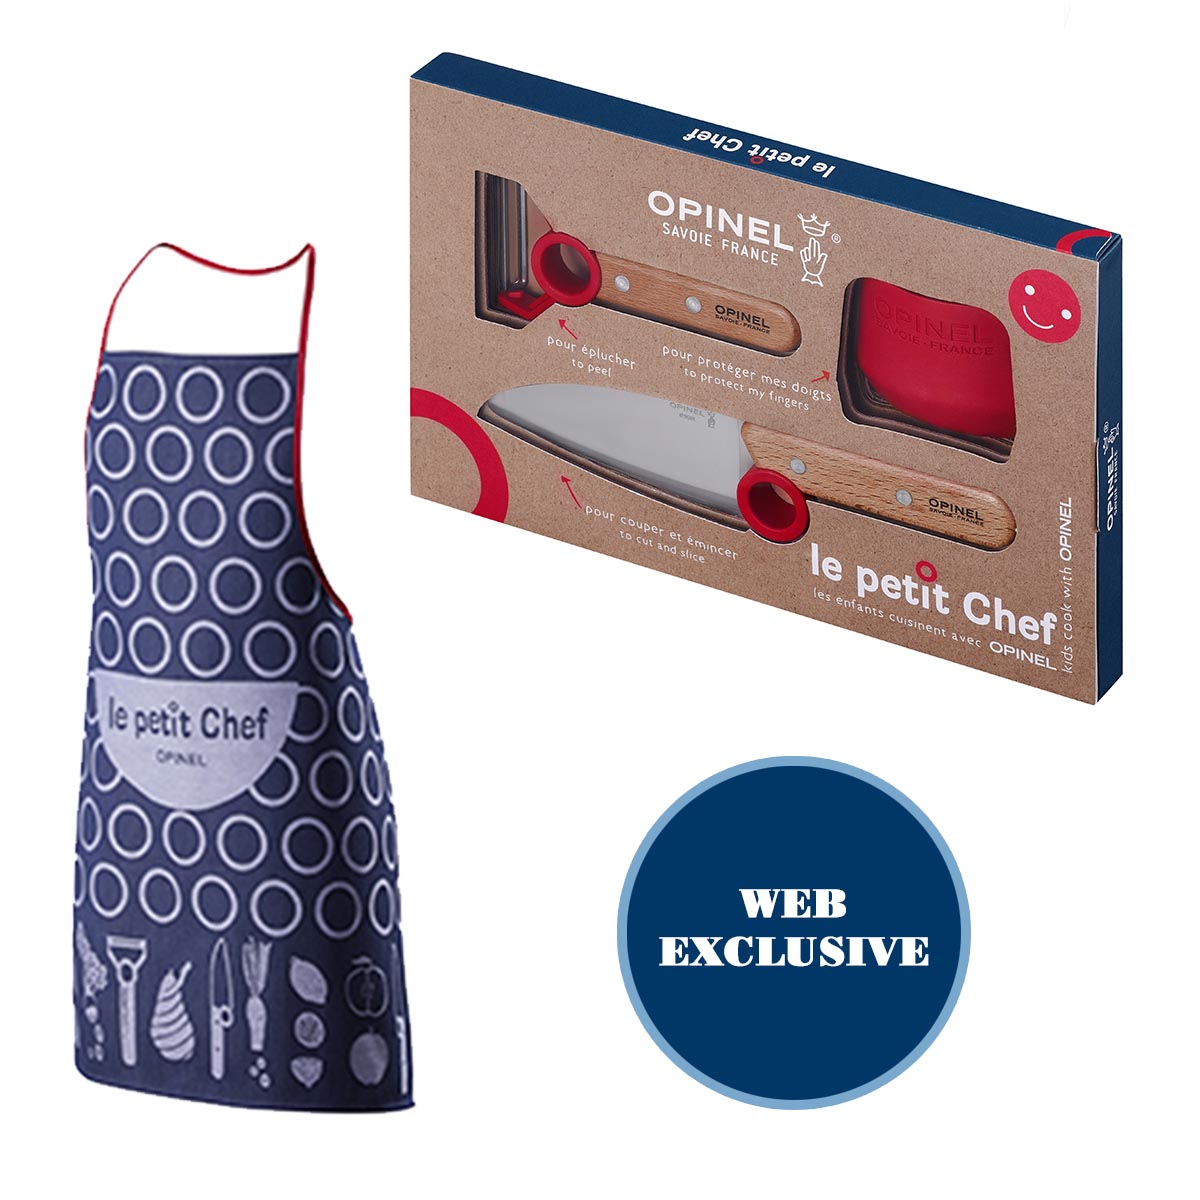 Opinel “Start them young” Kit